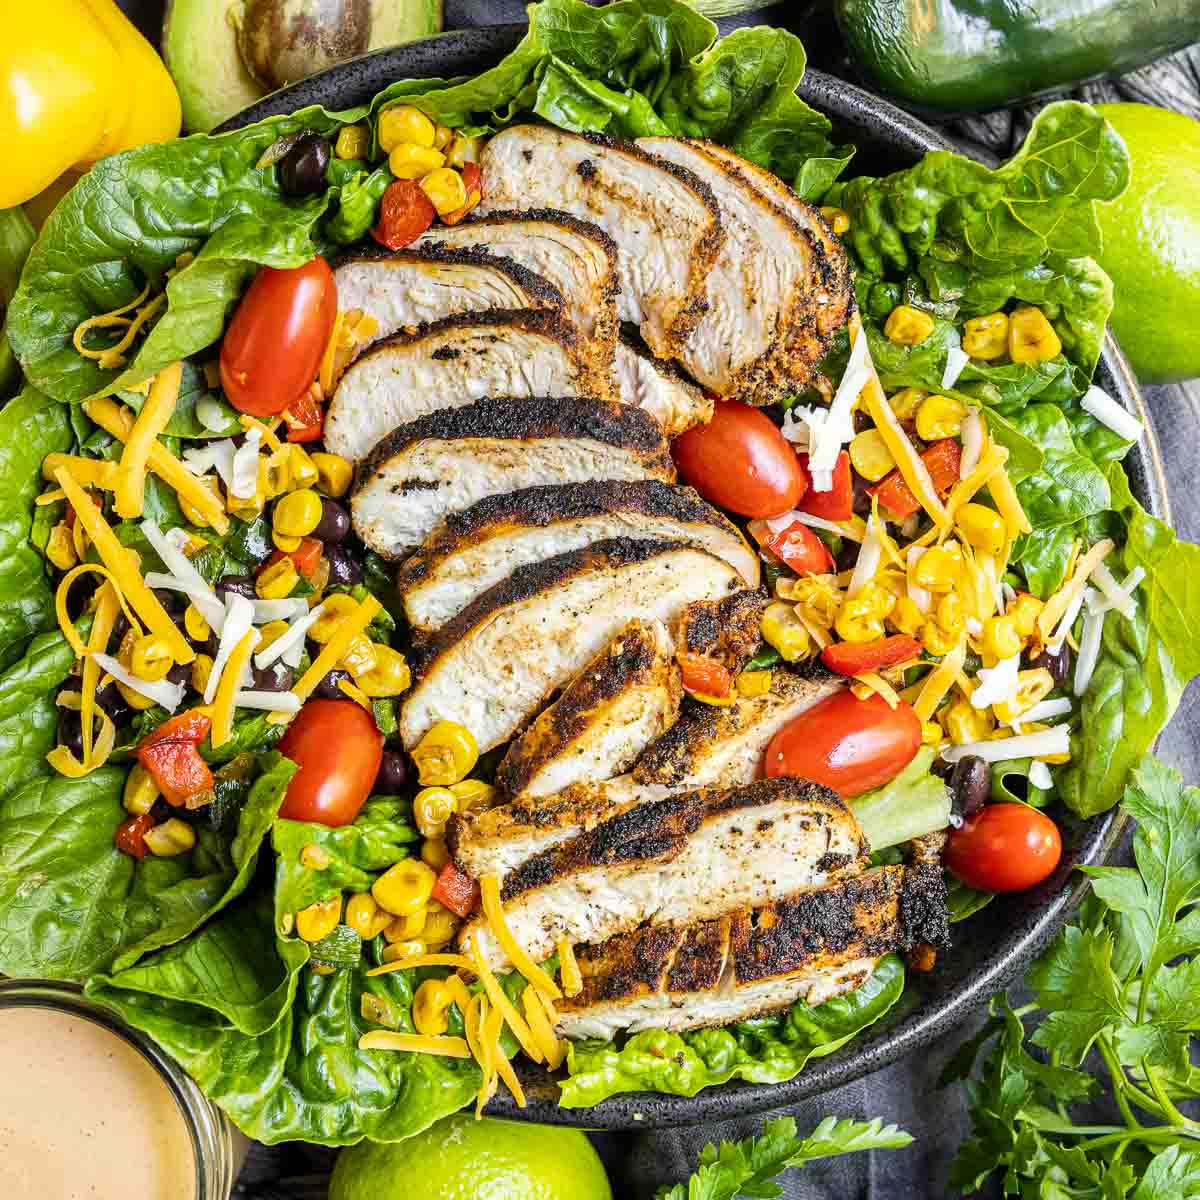 Southwest Salad made with blackened chicken